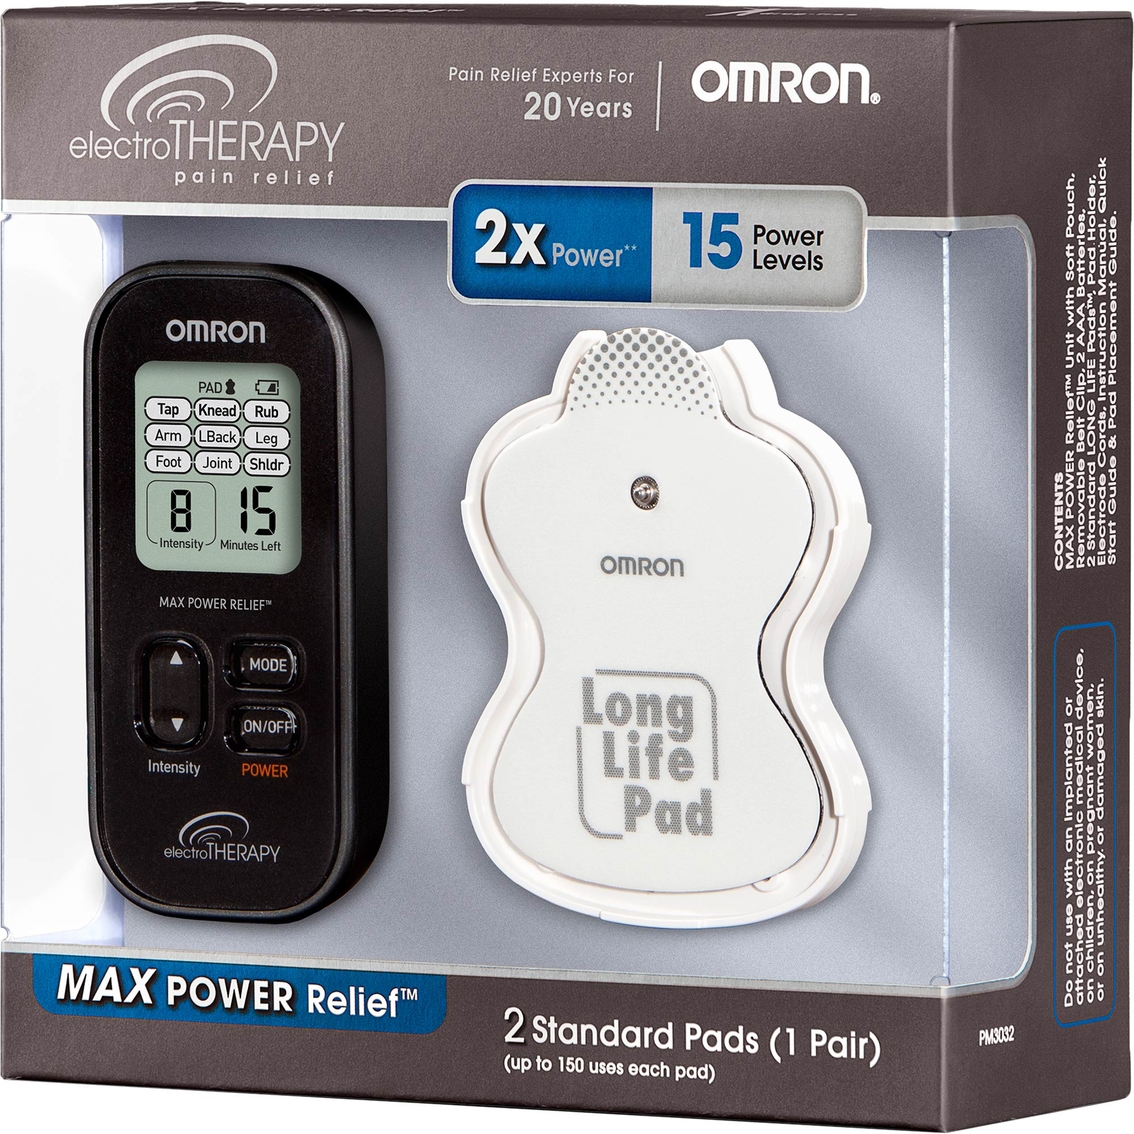 Omron Max Power Relief Tens Unit, Pain Relievers, Beauty & Health